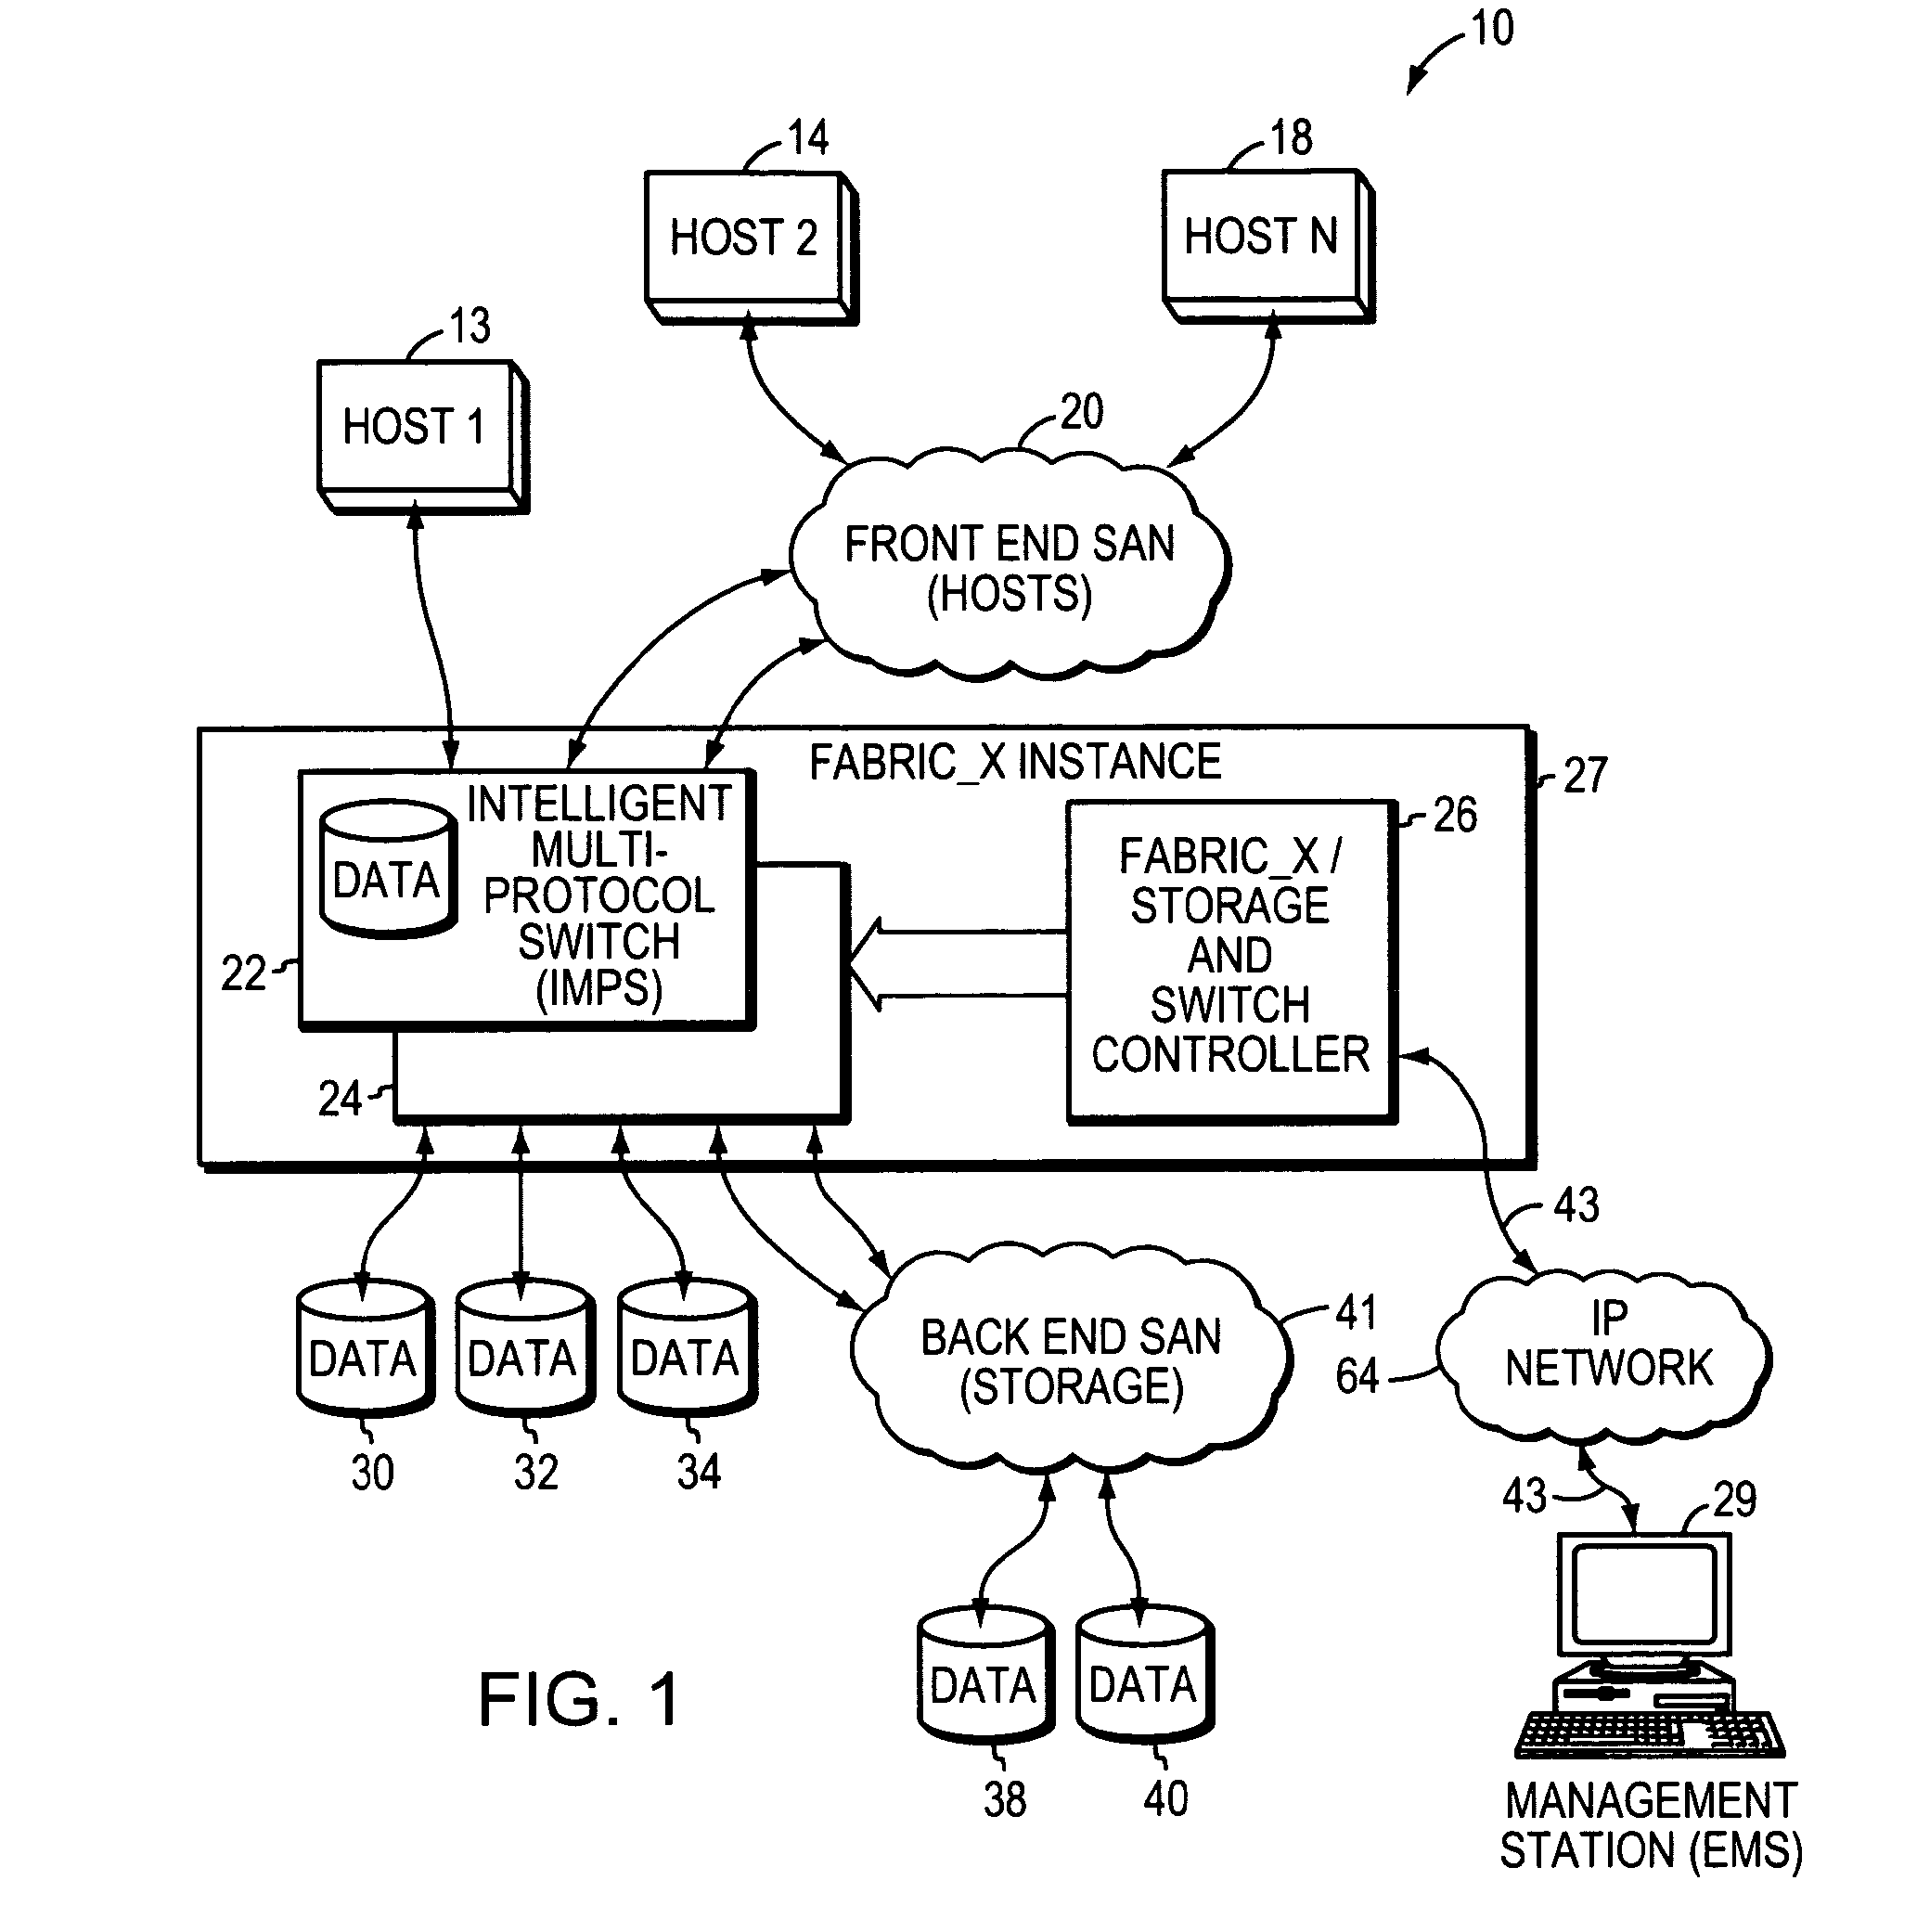 Architecture for virtualization of networked storage resources